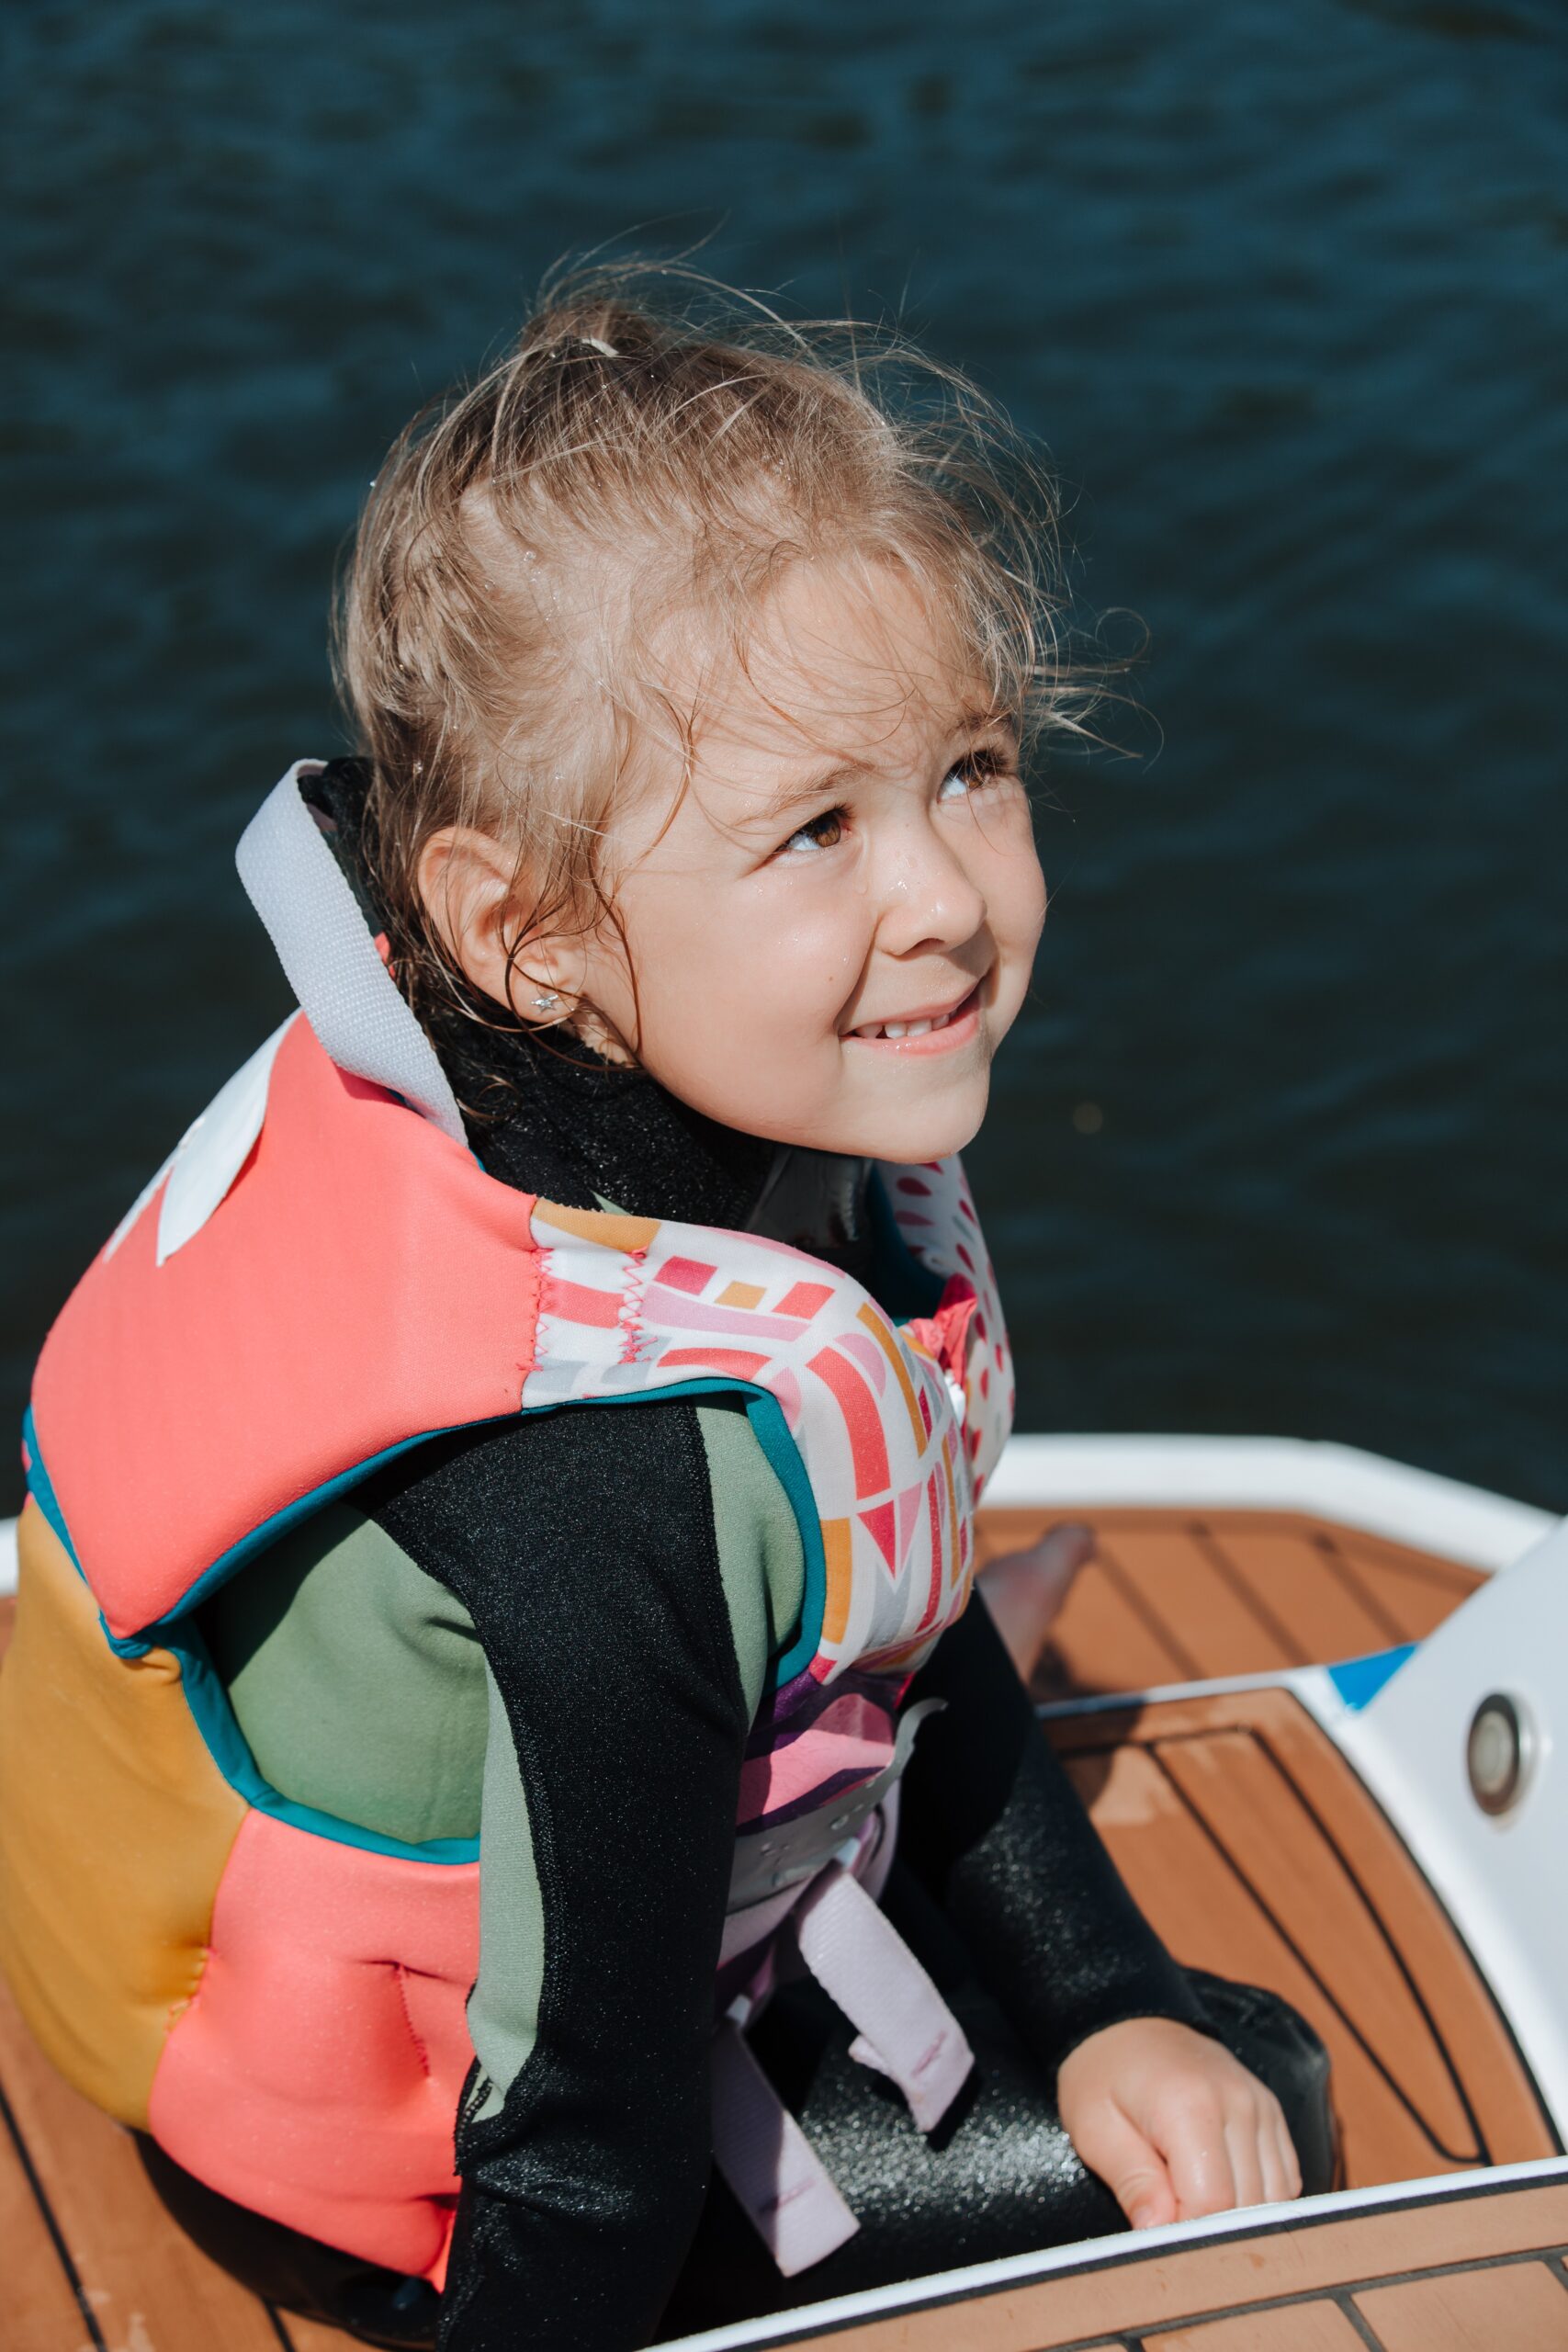 Young girl with a lifejacket, ready to go swimming.